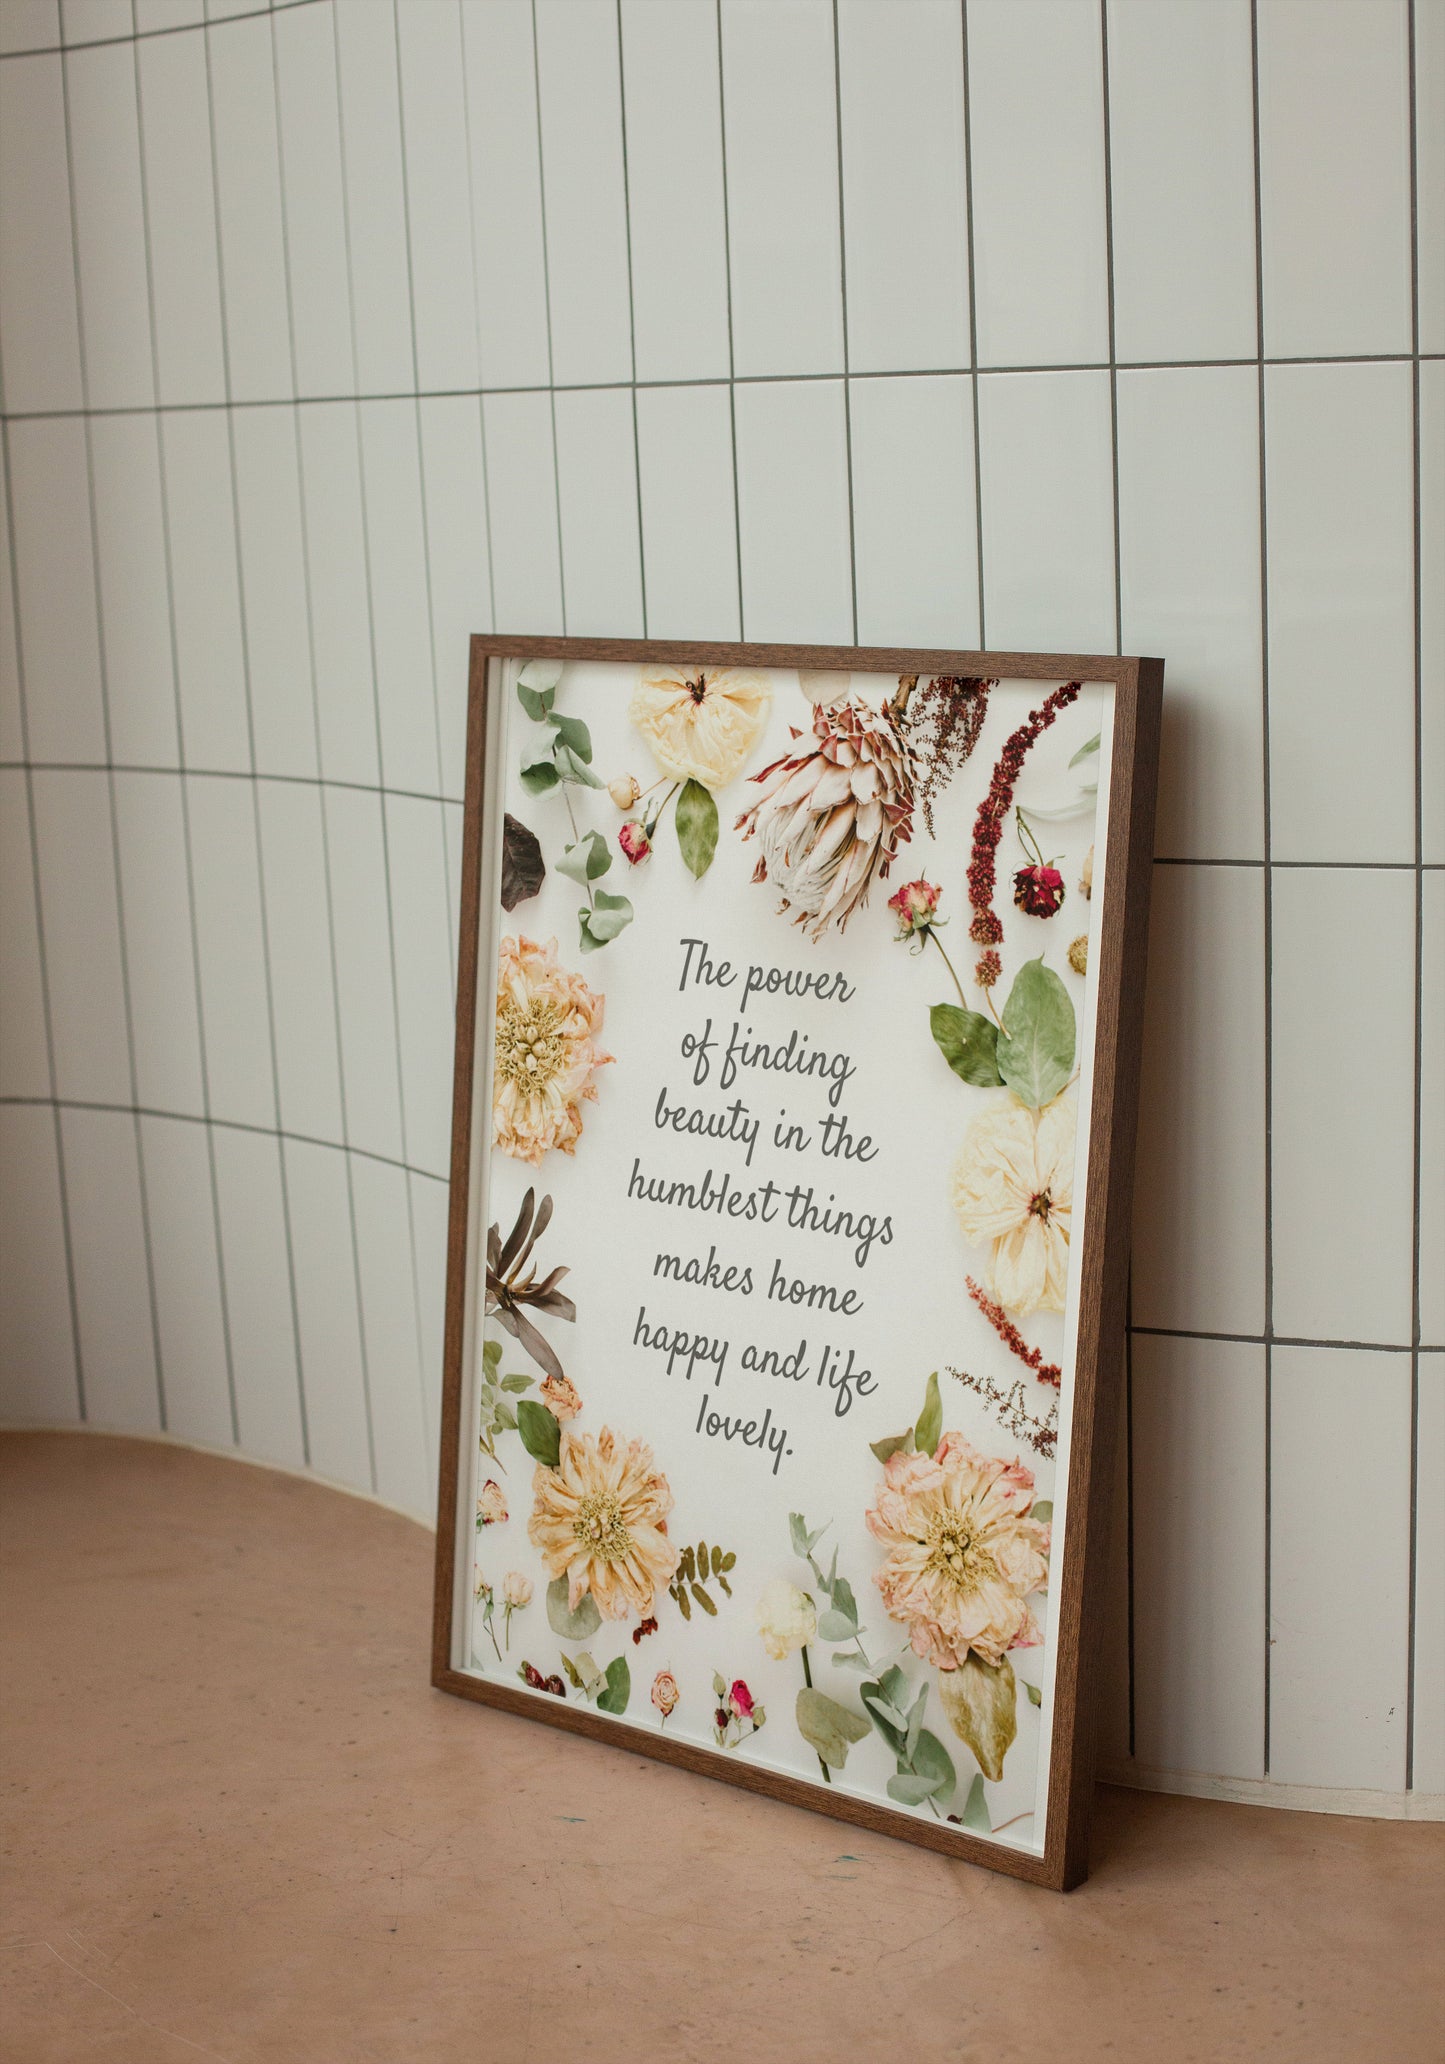 Little Women Quote | Louisa May Alcott Art Print - The power of finding beauty in the humblest things